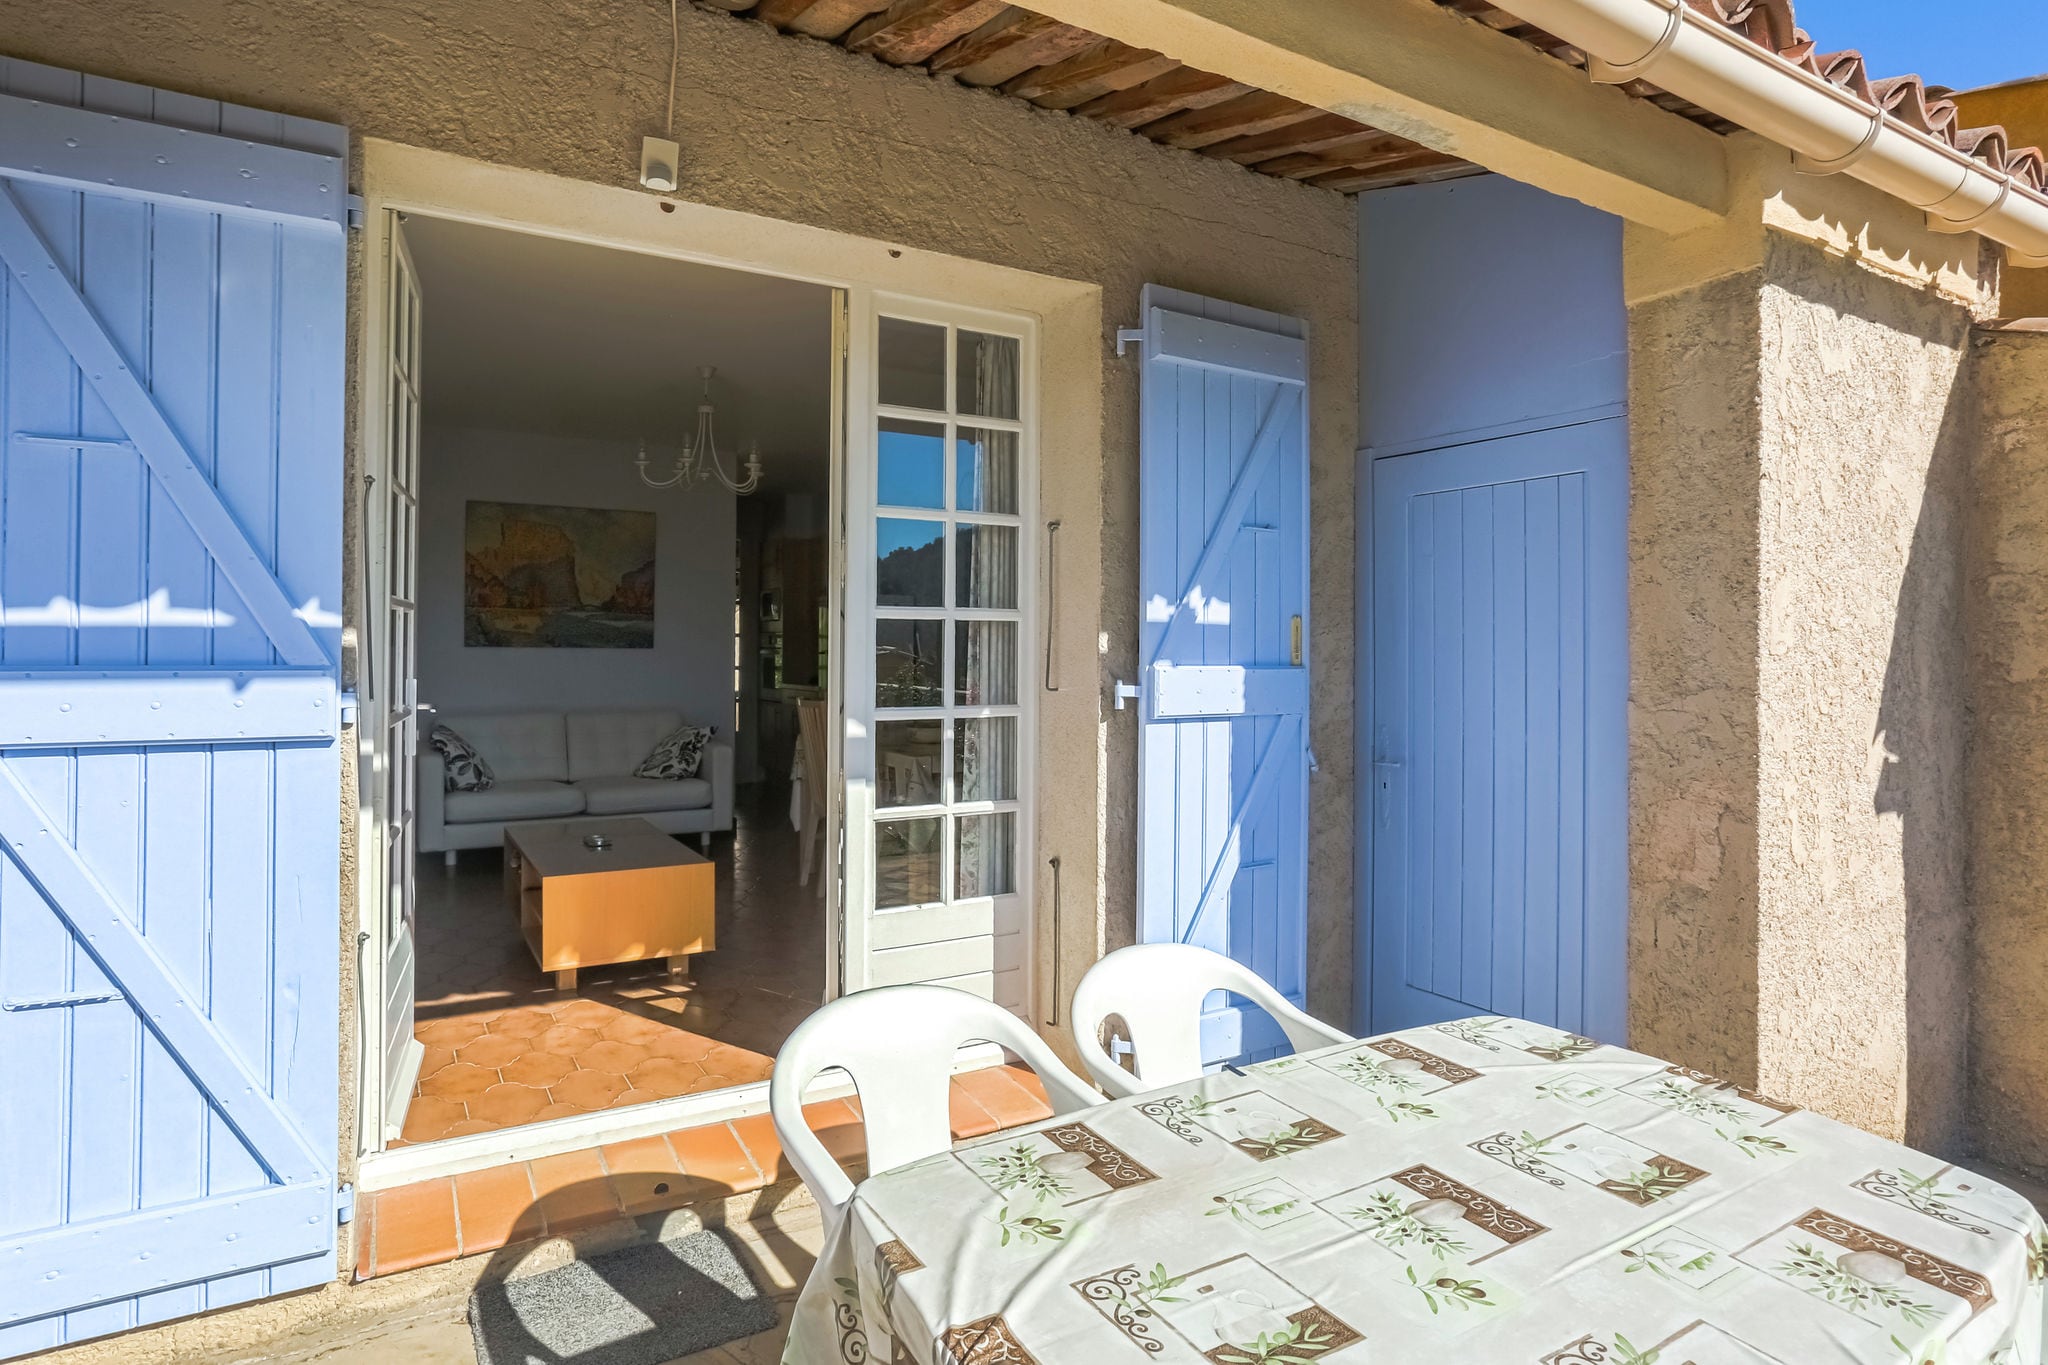 Holiday house nearby the Lac de Castillon; enjoy sun and nature in Provence!